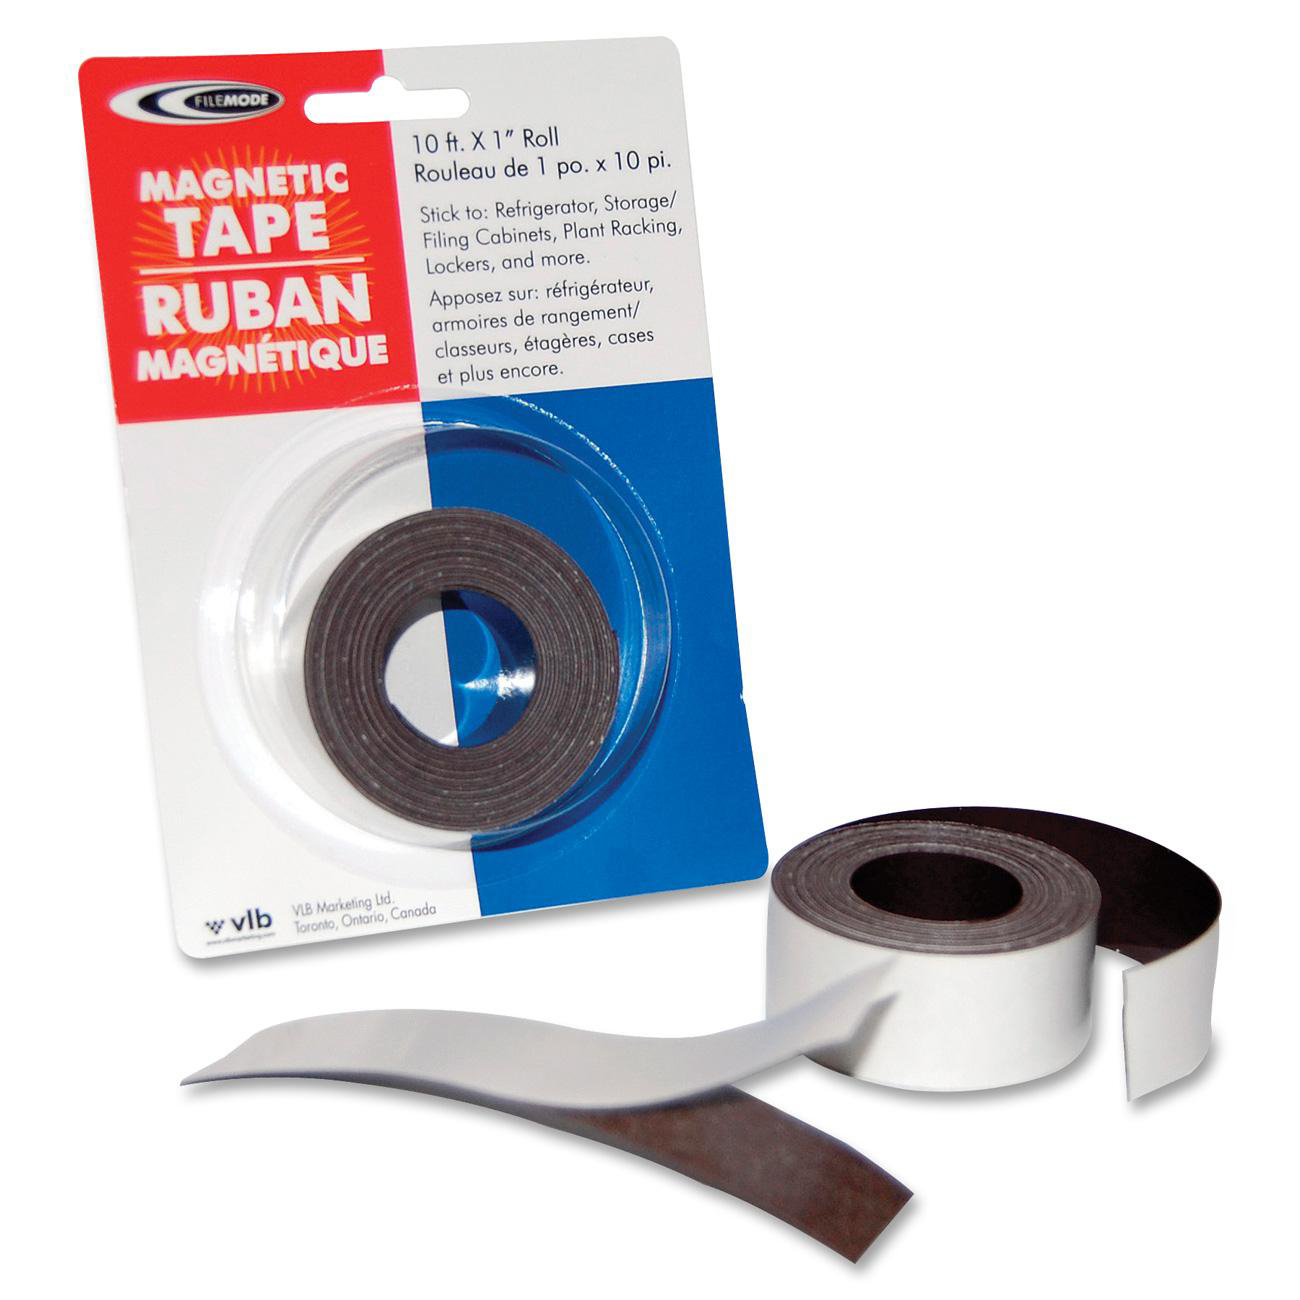 Magnetic tape - 10 m roll